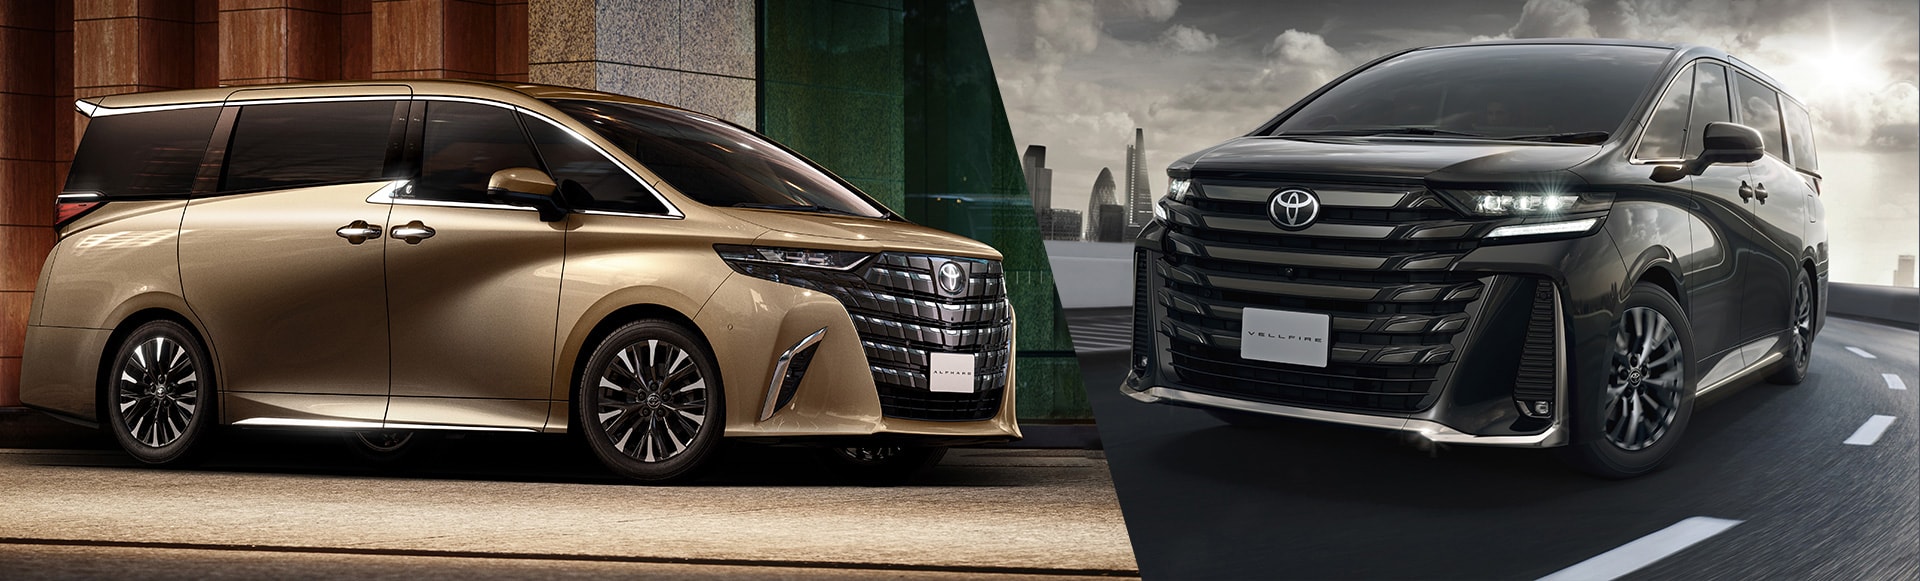 Toyota Launches All-New Alphard and Vellfire in Japan